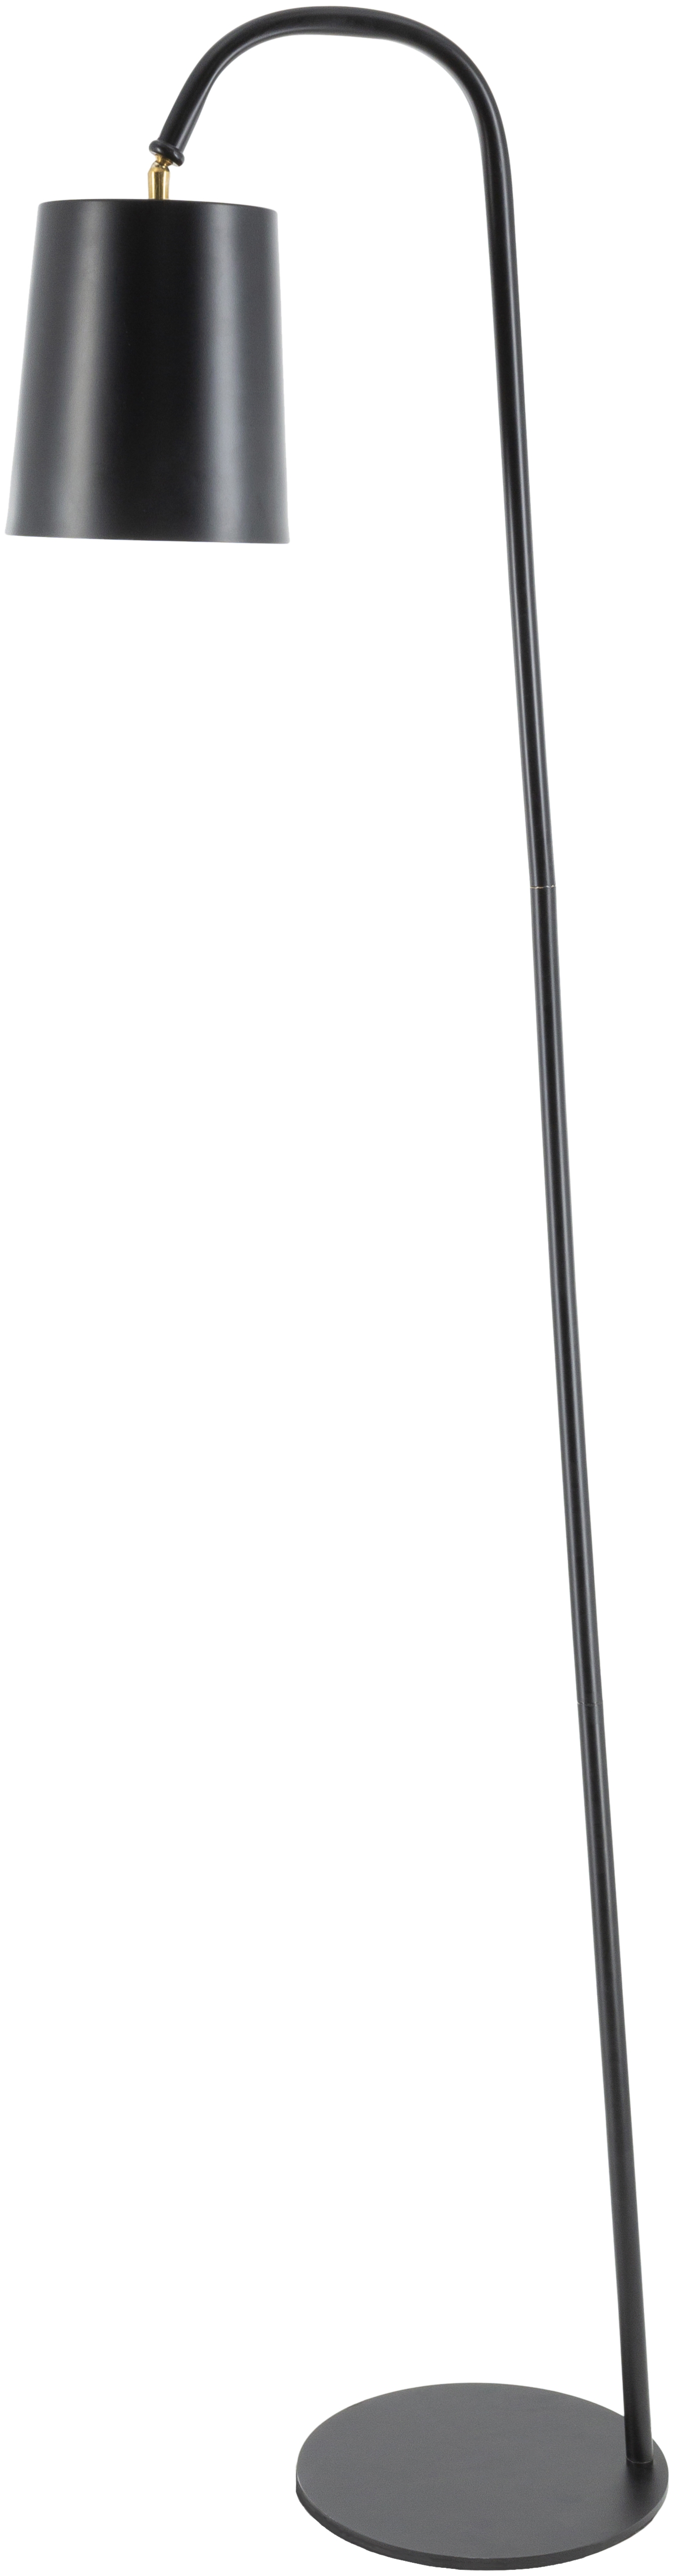 Polly Floor Lamp - Image 0